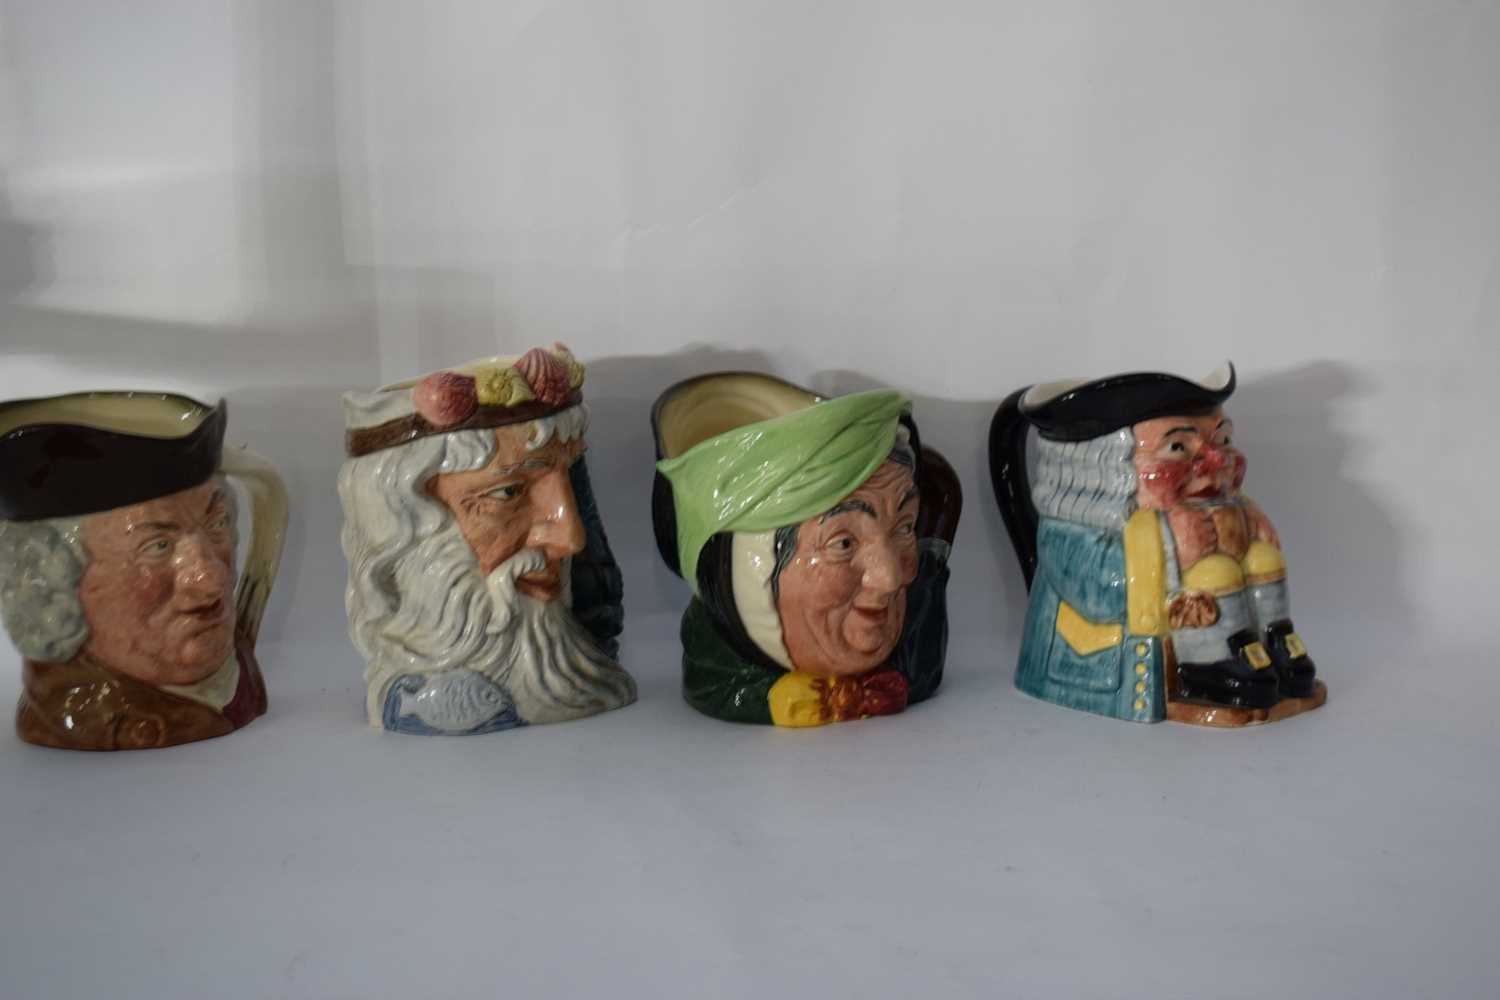 Group of character jugs, Royal Doulton Sari Gamp, Sam Johnson, Neptune and a Clarice Cliff - Image 2 of 4